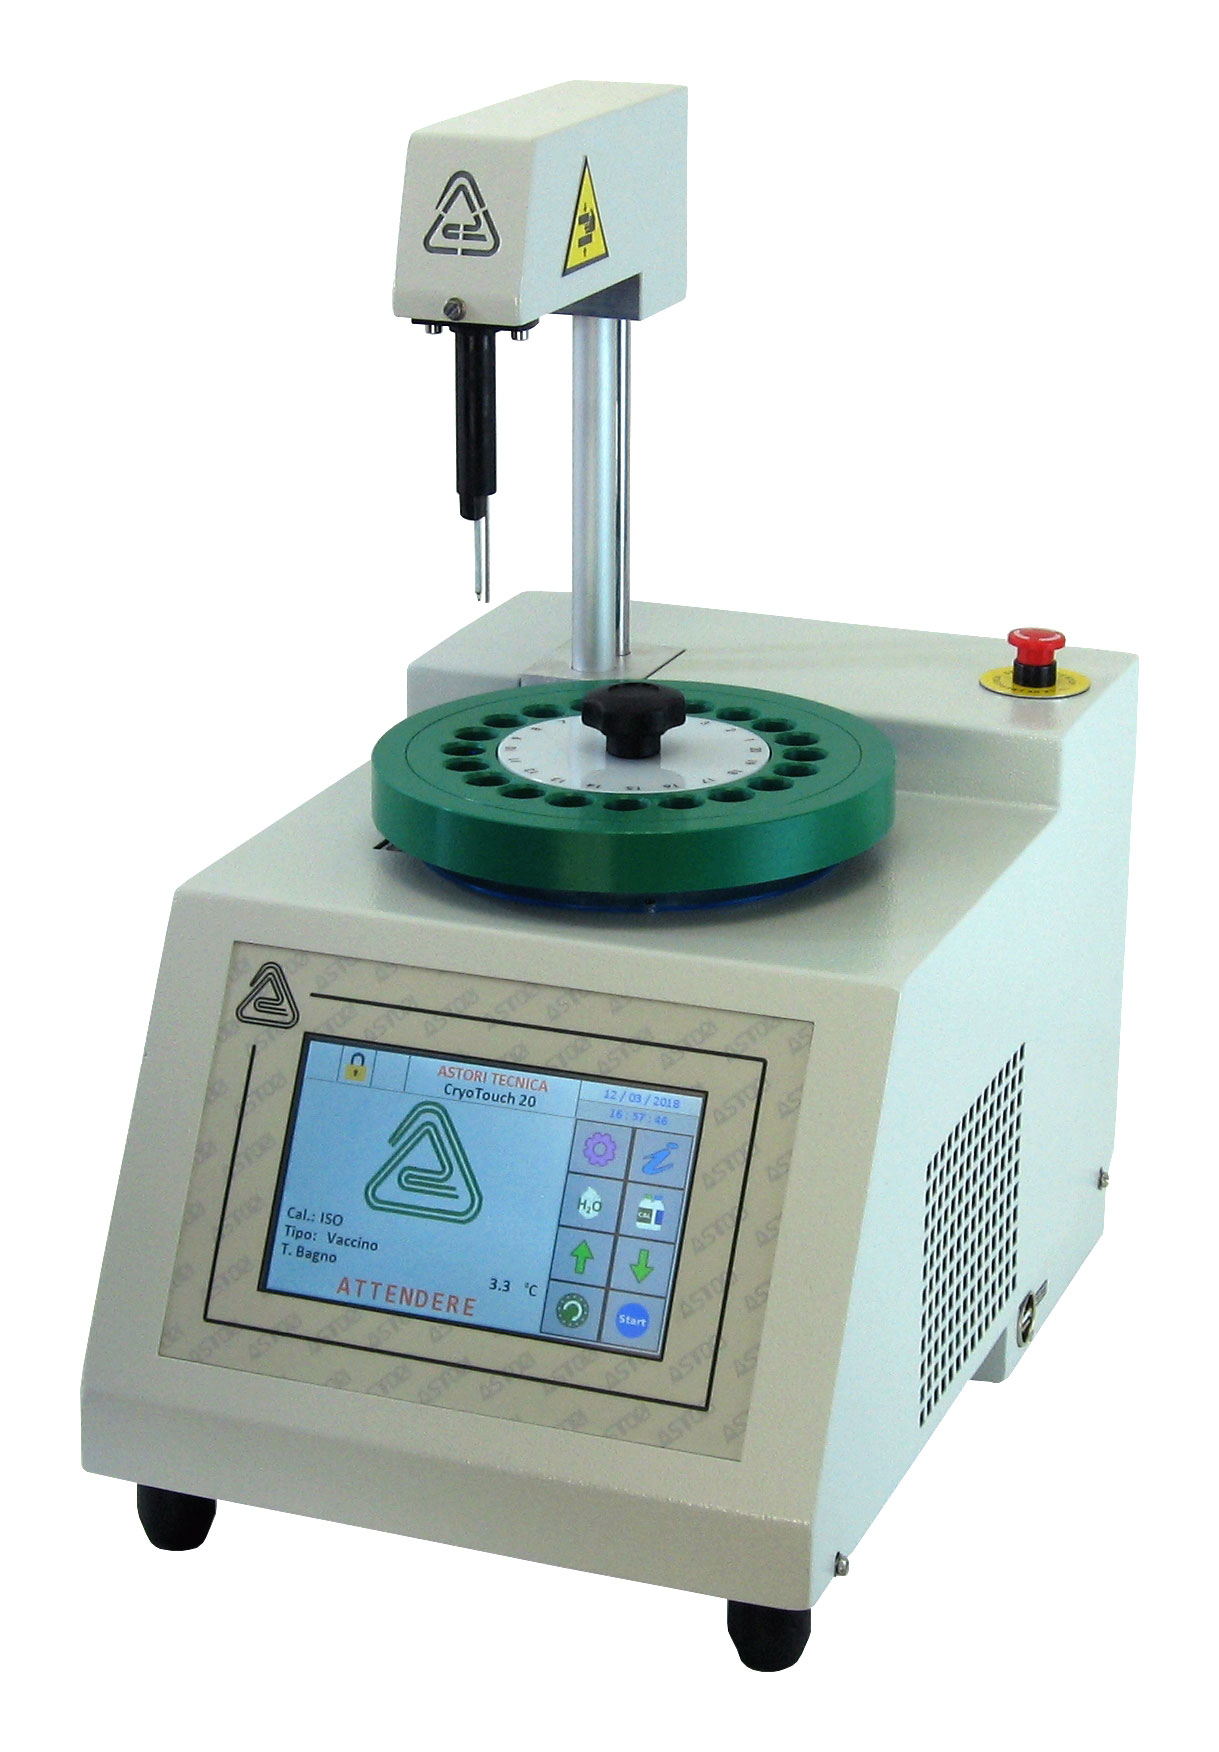 CryoTouch 20 automatic cryoscoper s with ''lactose-free'' function. ASTORI TECNICA. Number of samples: 20. Sample volume (ml): 2 or 2.5. Resolution (ºC): ±0.0005. Reproducibility (ºC): ±0.0025 (bovine milk). Dim. WxHxD (mm): 285x360x485 (with head down). Weight (kg): 17.4.Supplied with a 'starter-kit' including a box of glass sample tubes, a tube-holder, 3 calibration standards and a cooling liquid bottle.